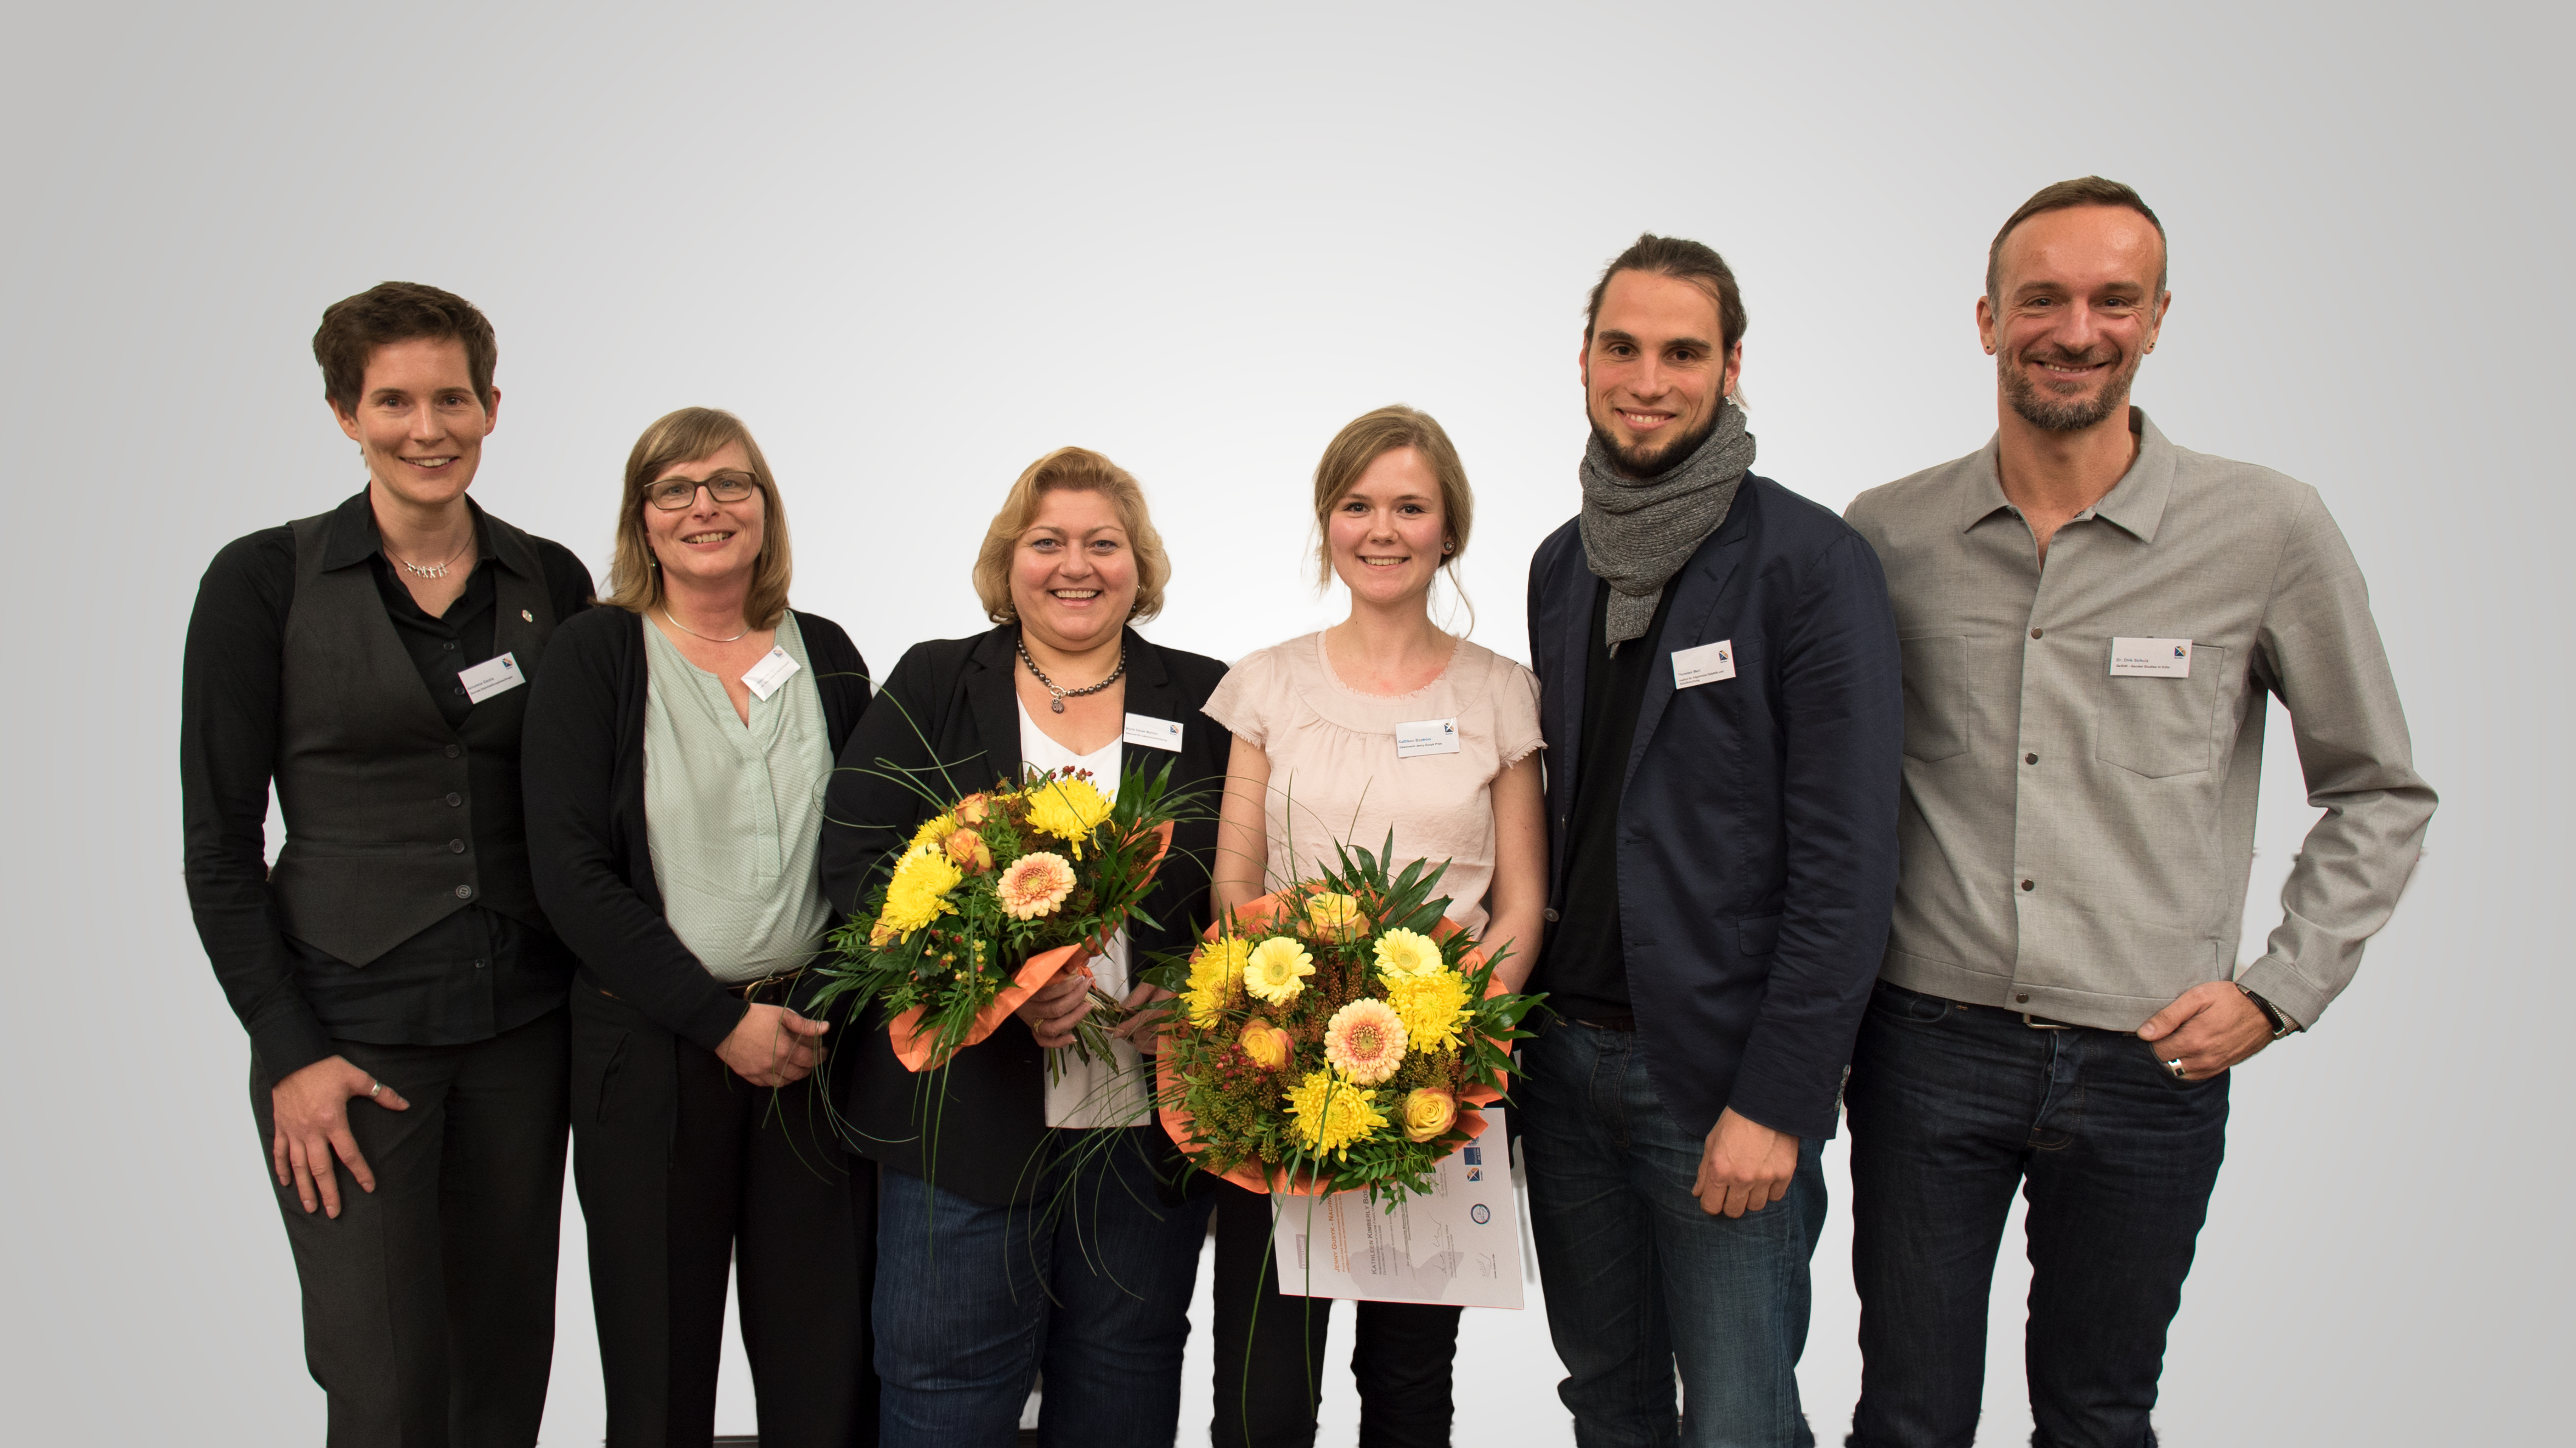  All Jenny-Gusyk prizewinners of the year 2015 together with Mrs. Künneke, Mrs. Gäckle and Mr. Schulz